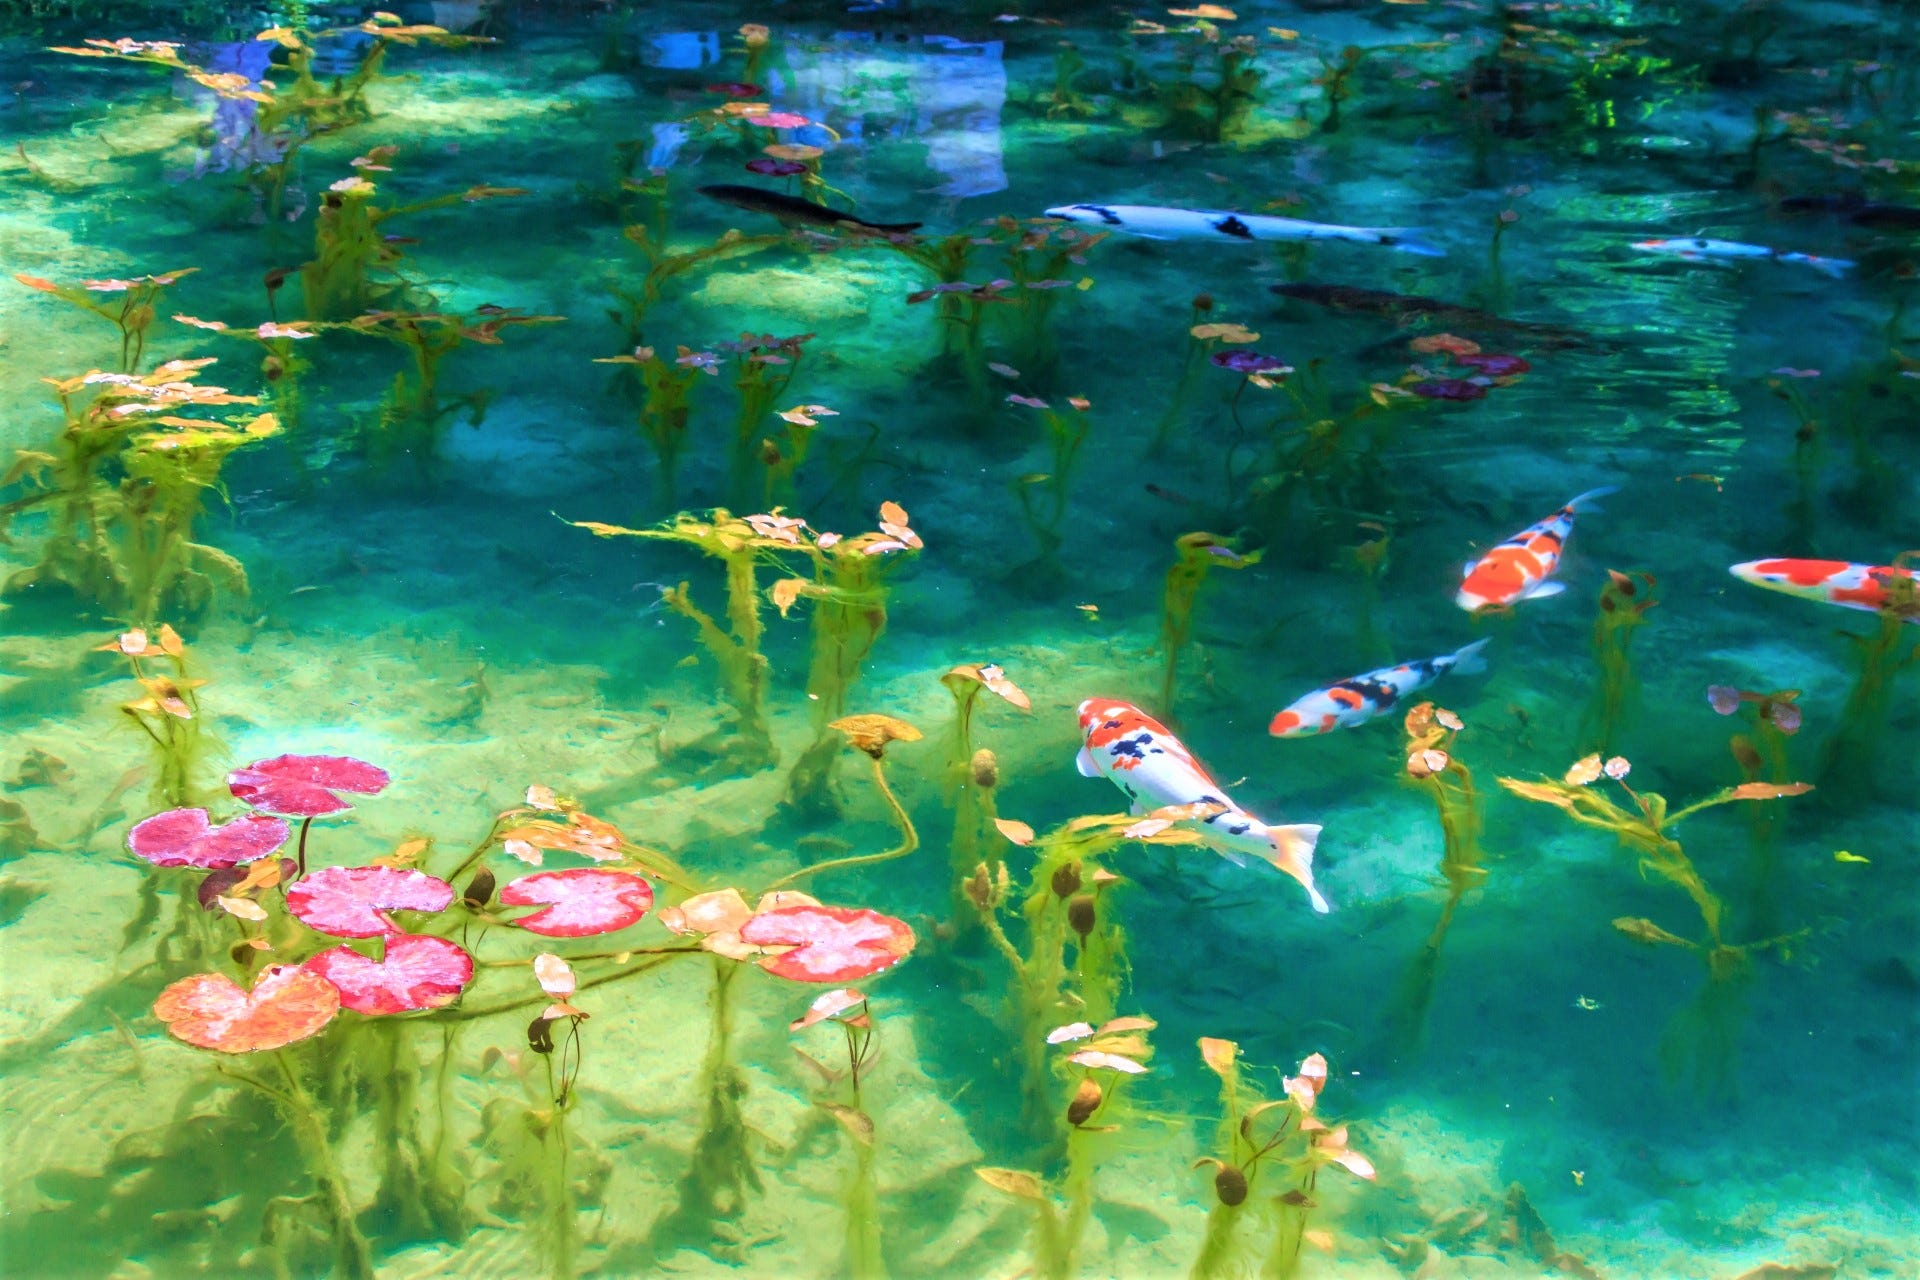 The Mystery Pond In Japan Looks Like Monet’s Paintings